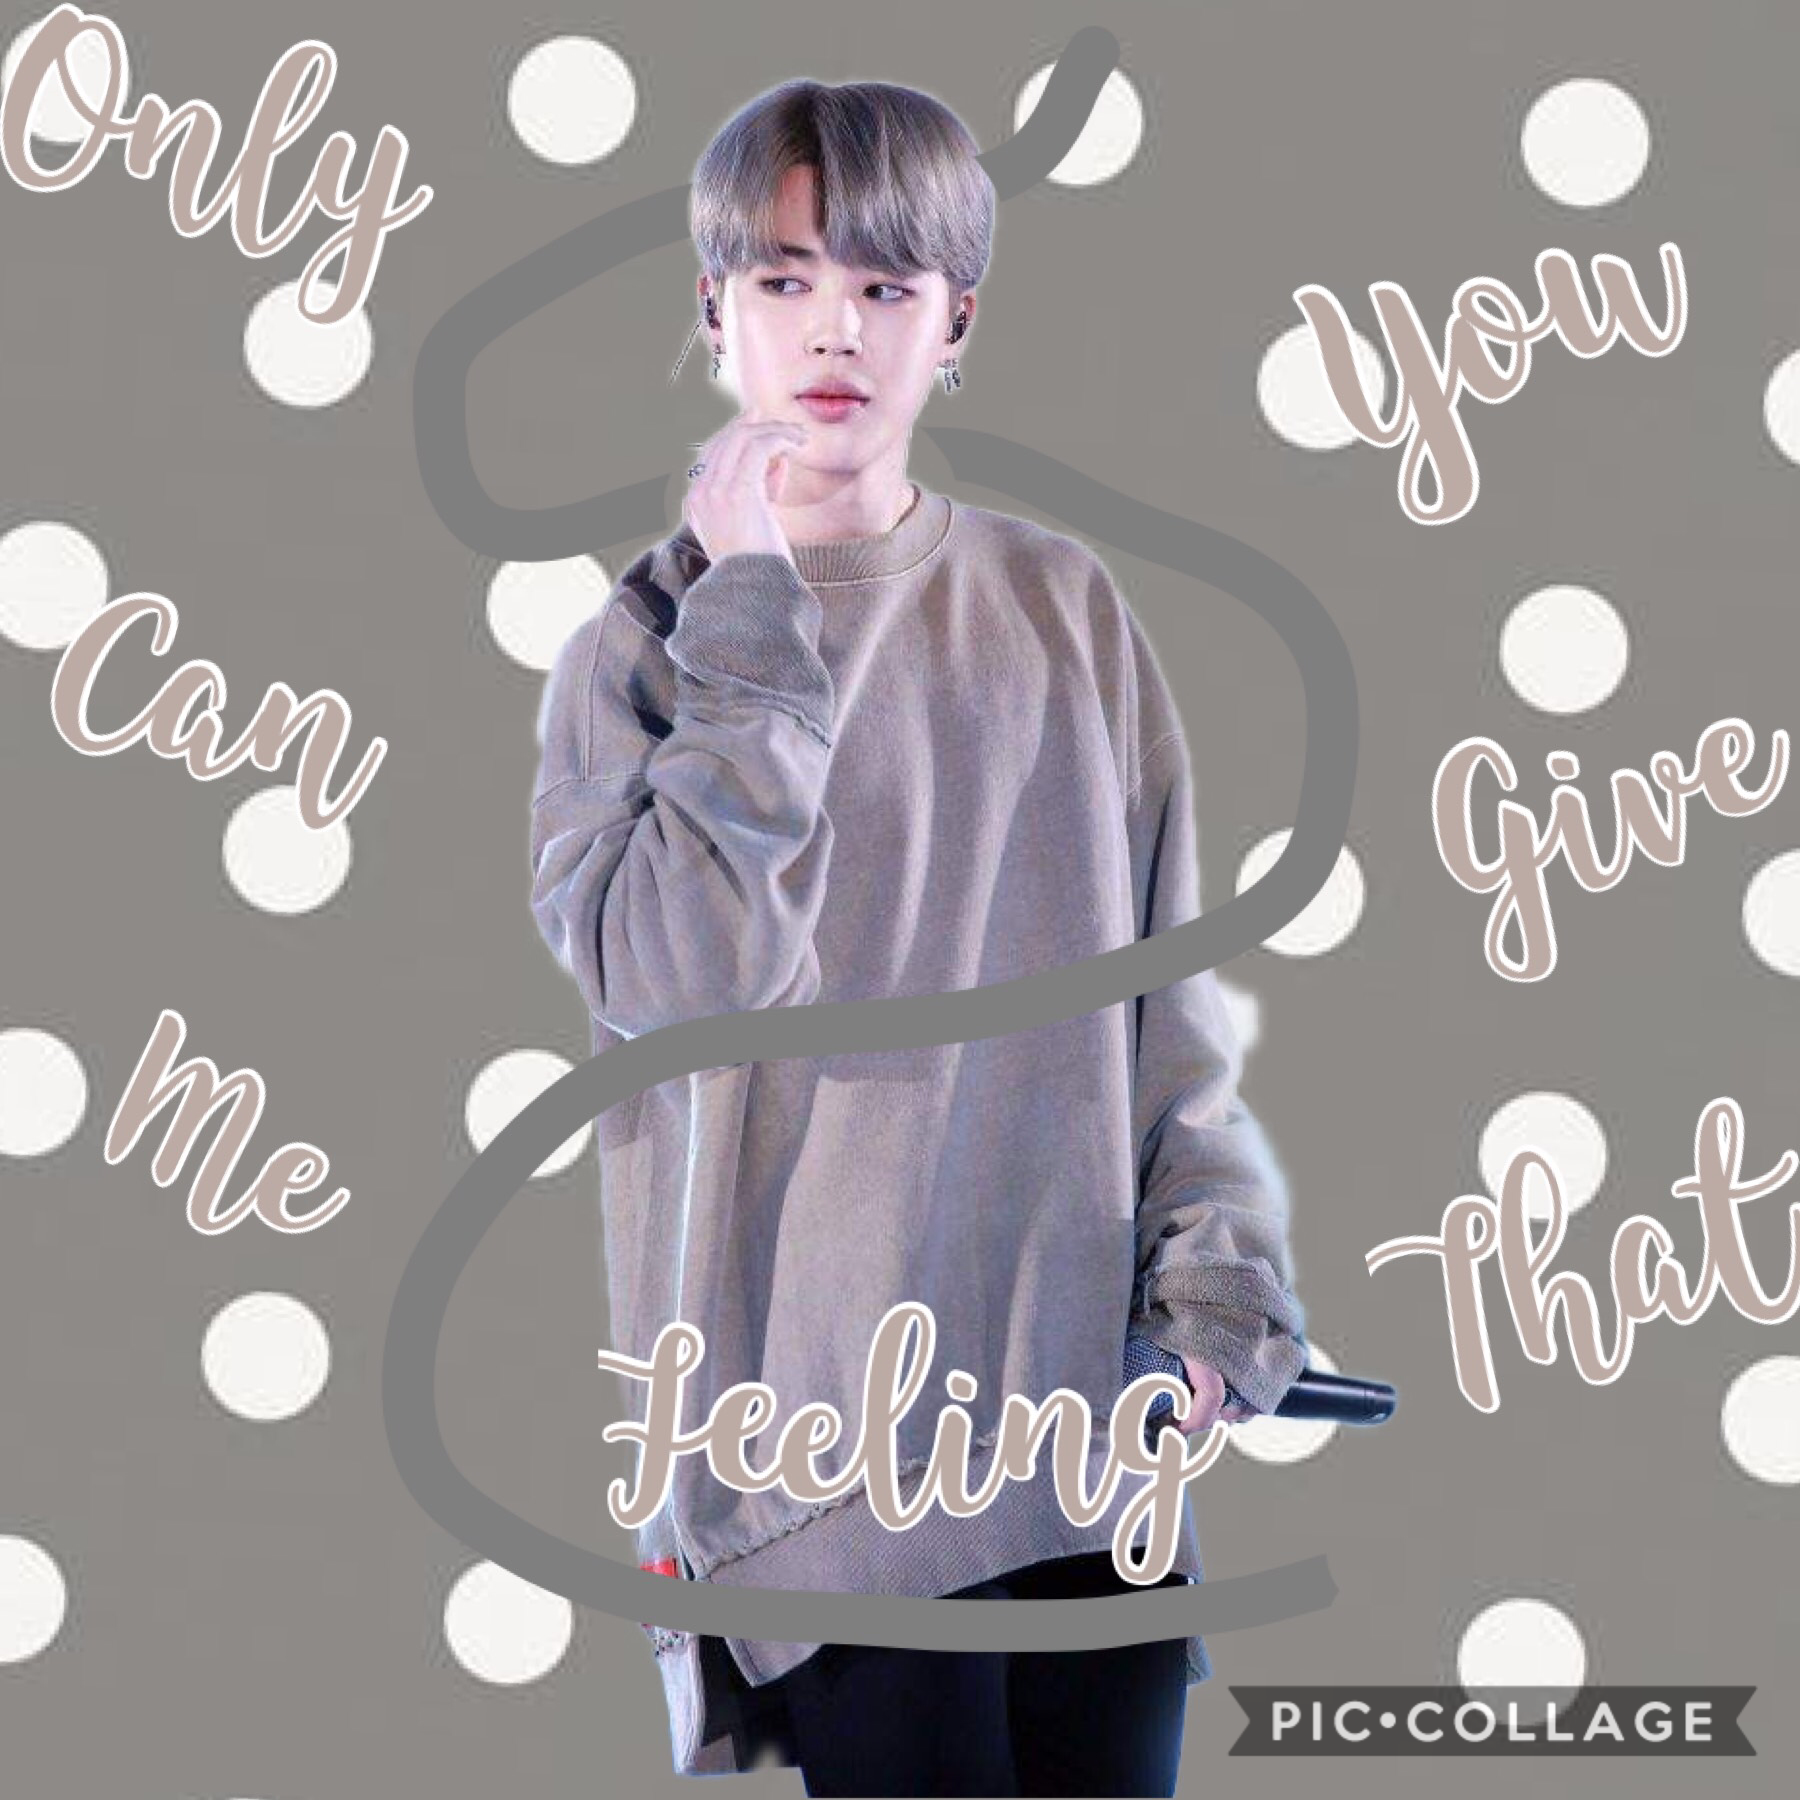   ❤️TAP❤️

Only you can give me that feeling Park Jimin. Eh I was bored so I made this, I might make another one 😂😂😂😂